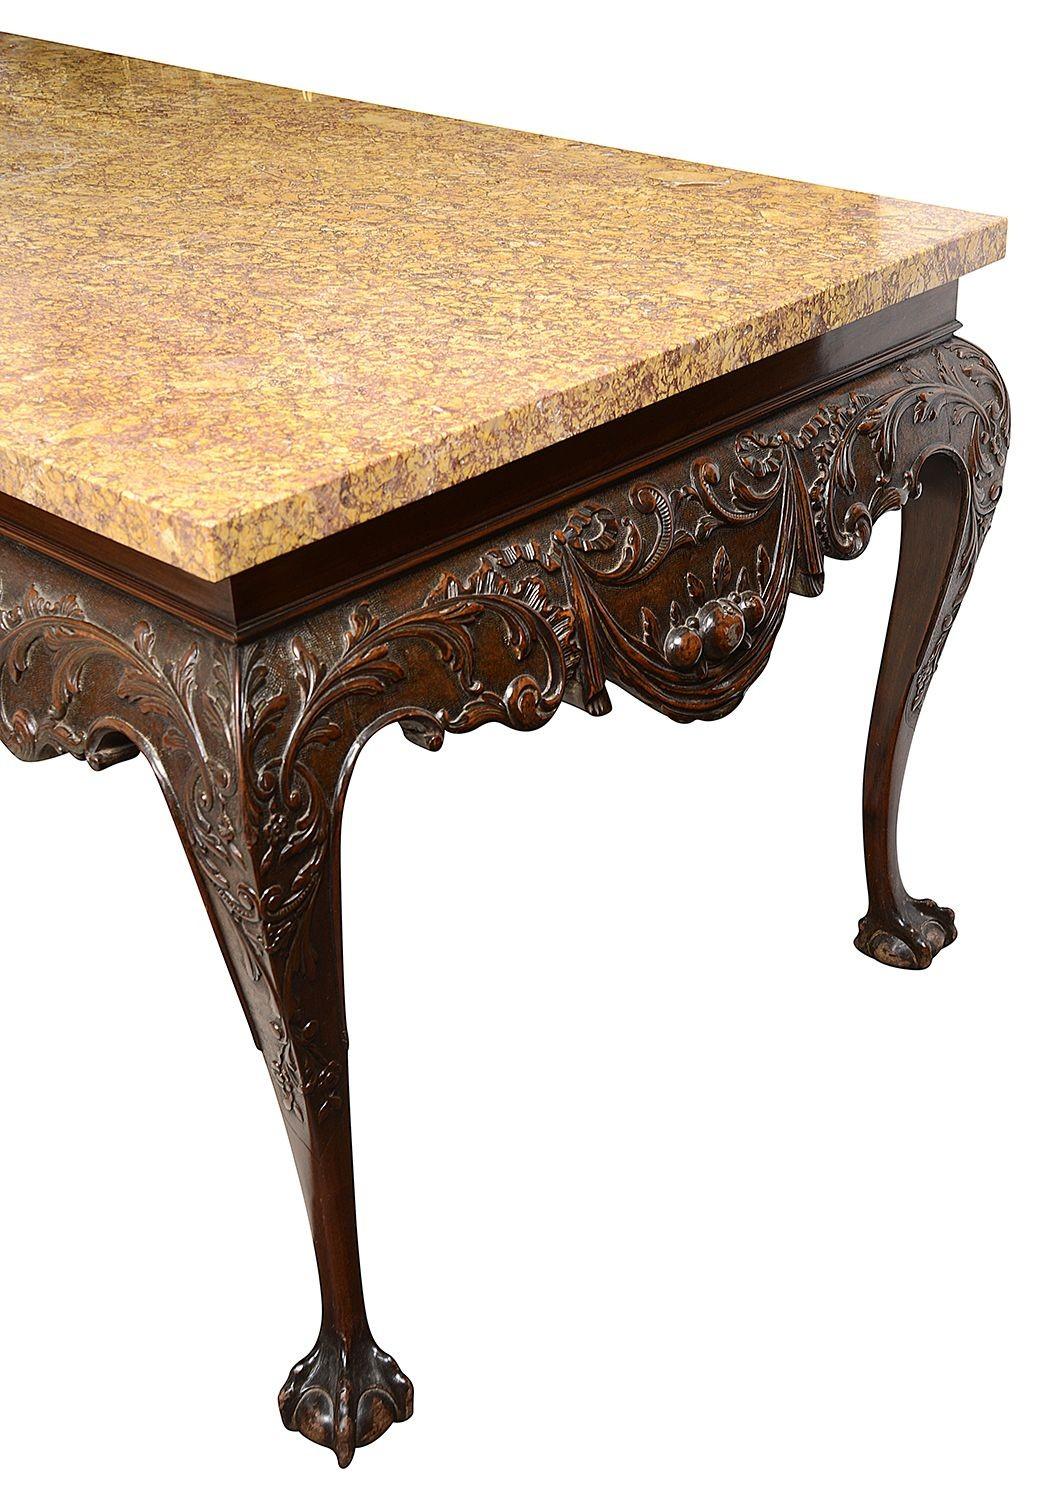 Irish Influenced Marble Topped Console / Side Table, Late 19th Century For Sale 2